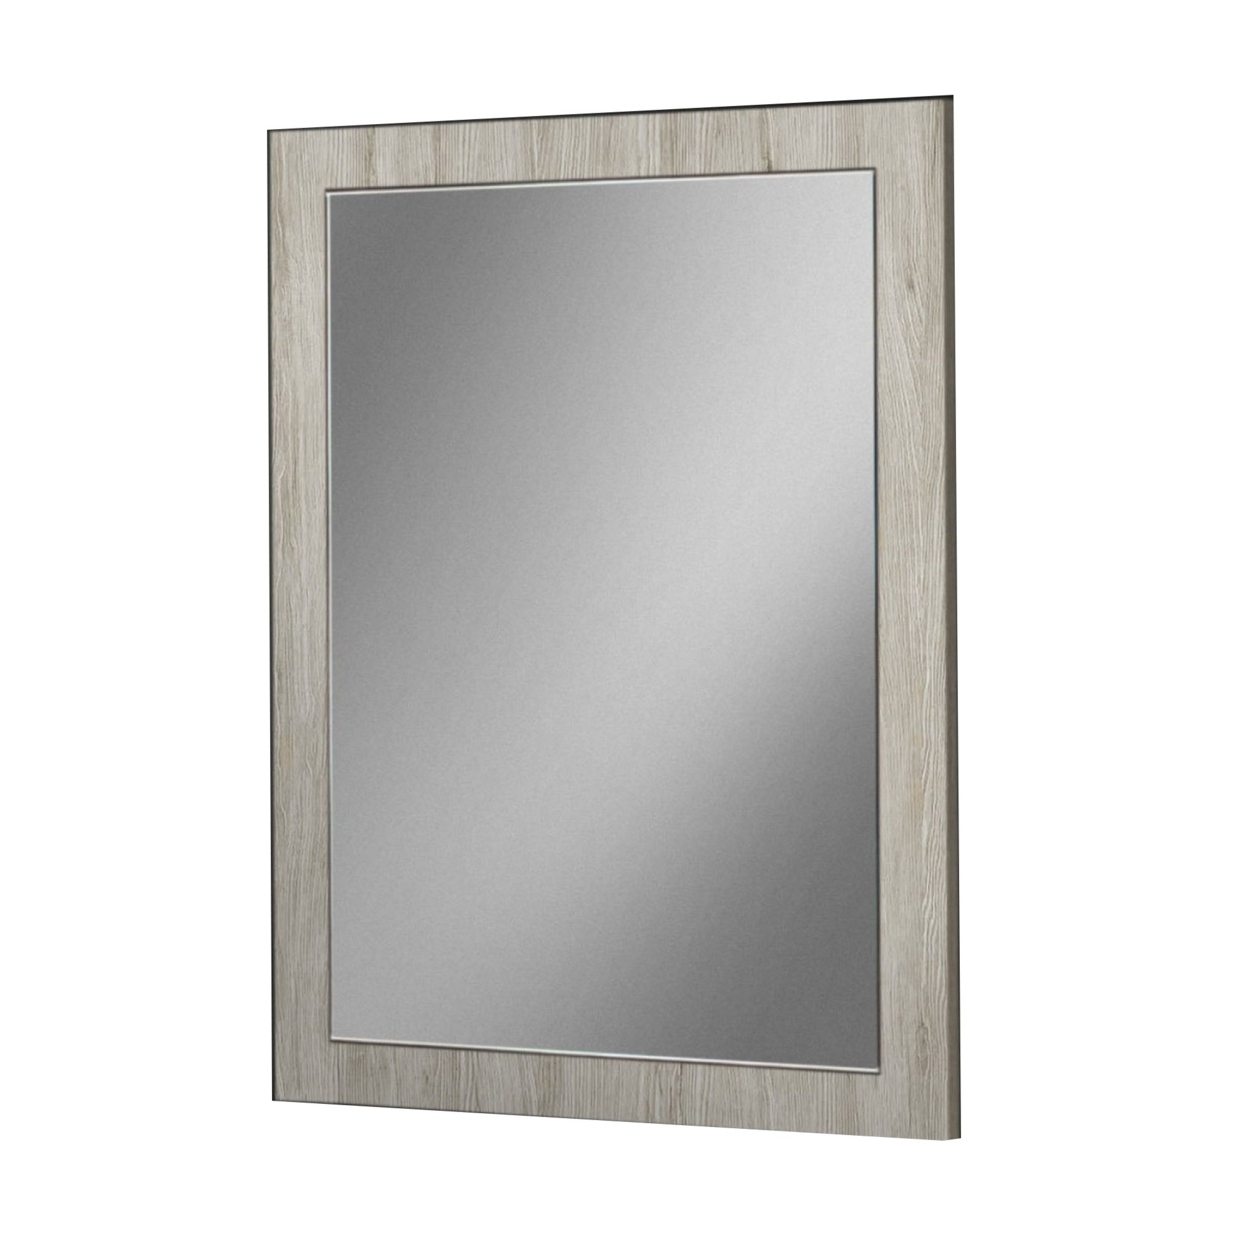 Dual Tone Wall Mirror With Wooden Frame, Black And Gray- Saltoro Sherpi